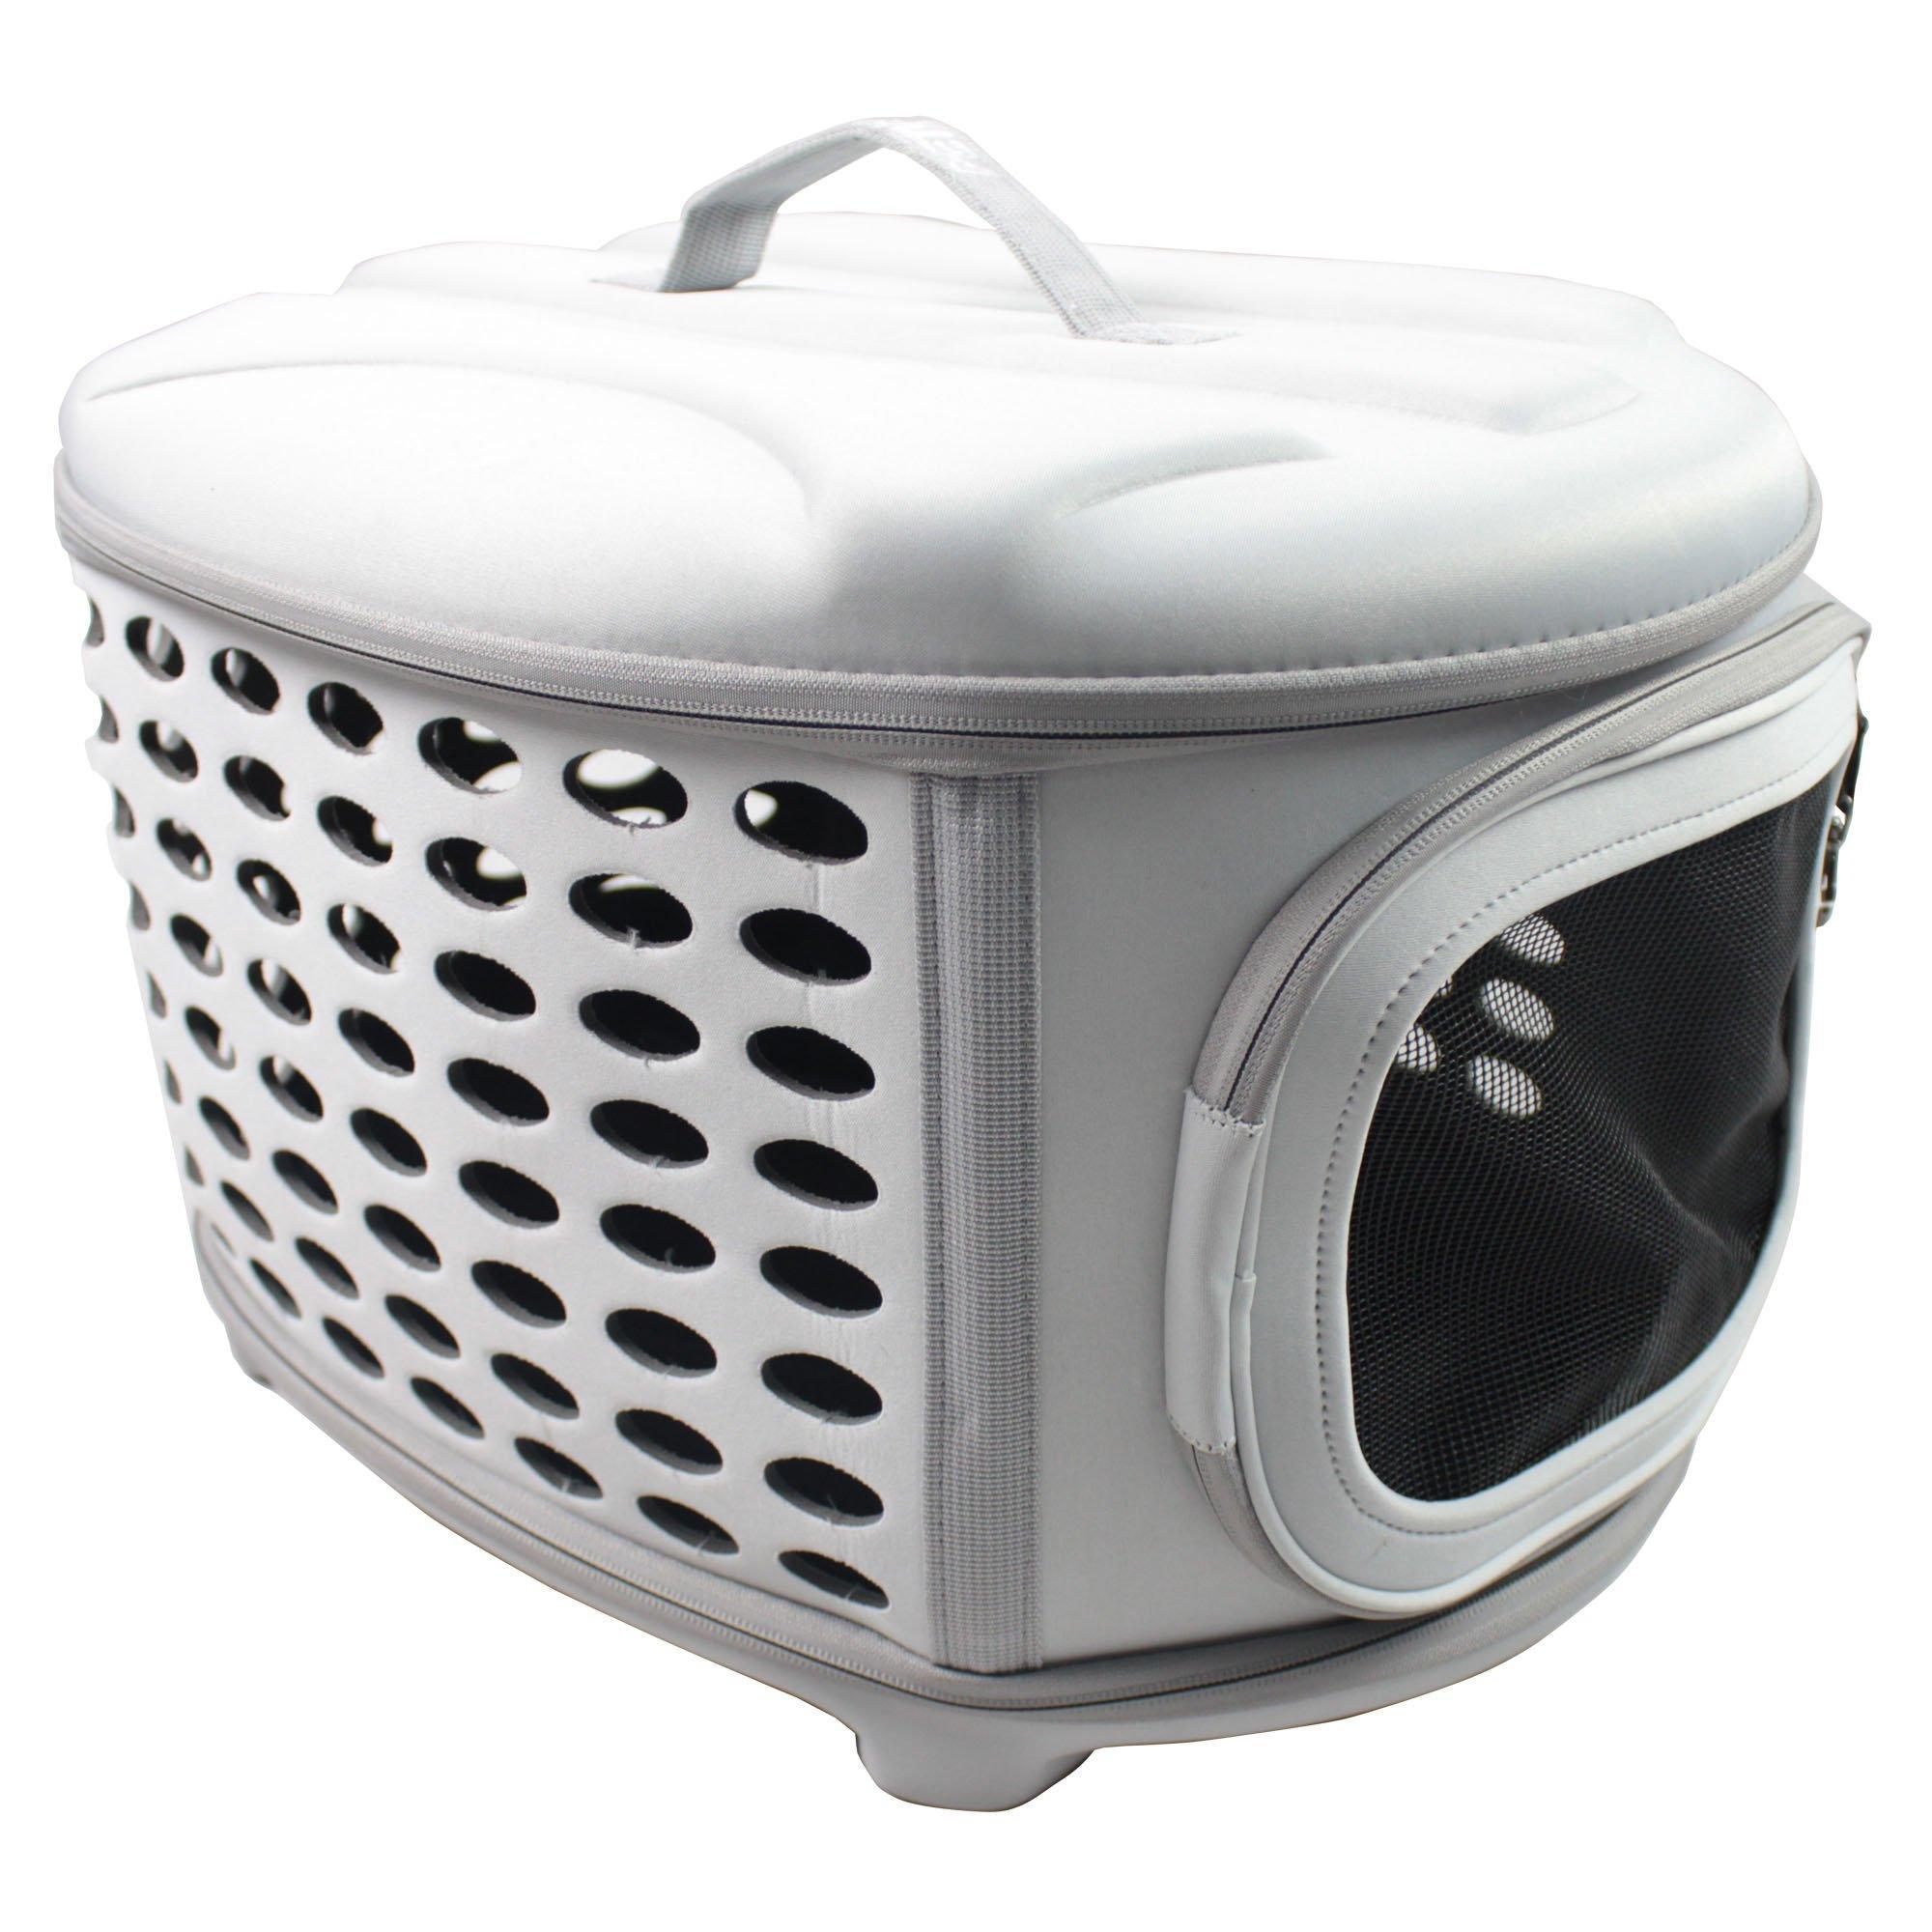 Pet Life ® 'Circular Shelled' Perforated Lightweight Collapsible Military Grade Travel Pet Dog Carrier  